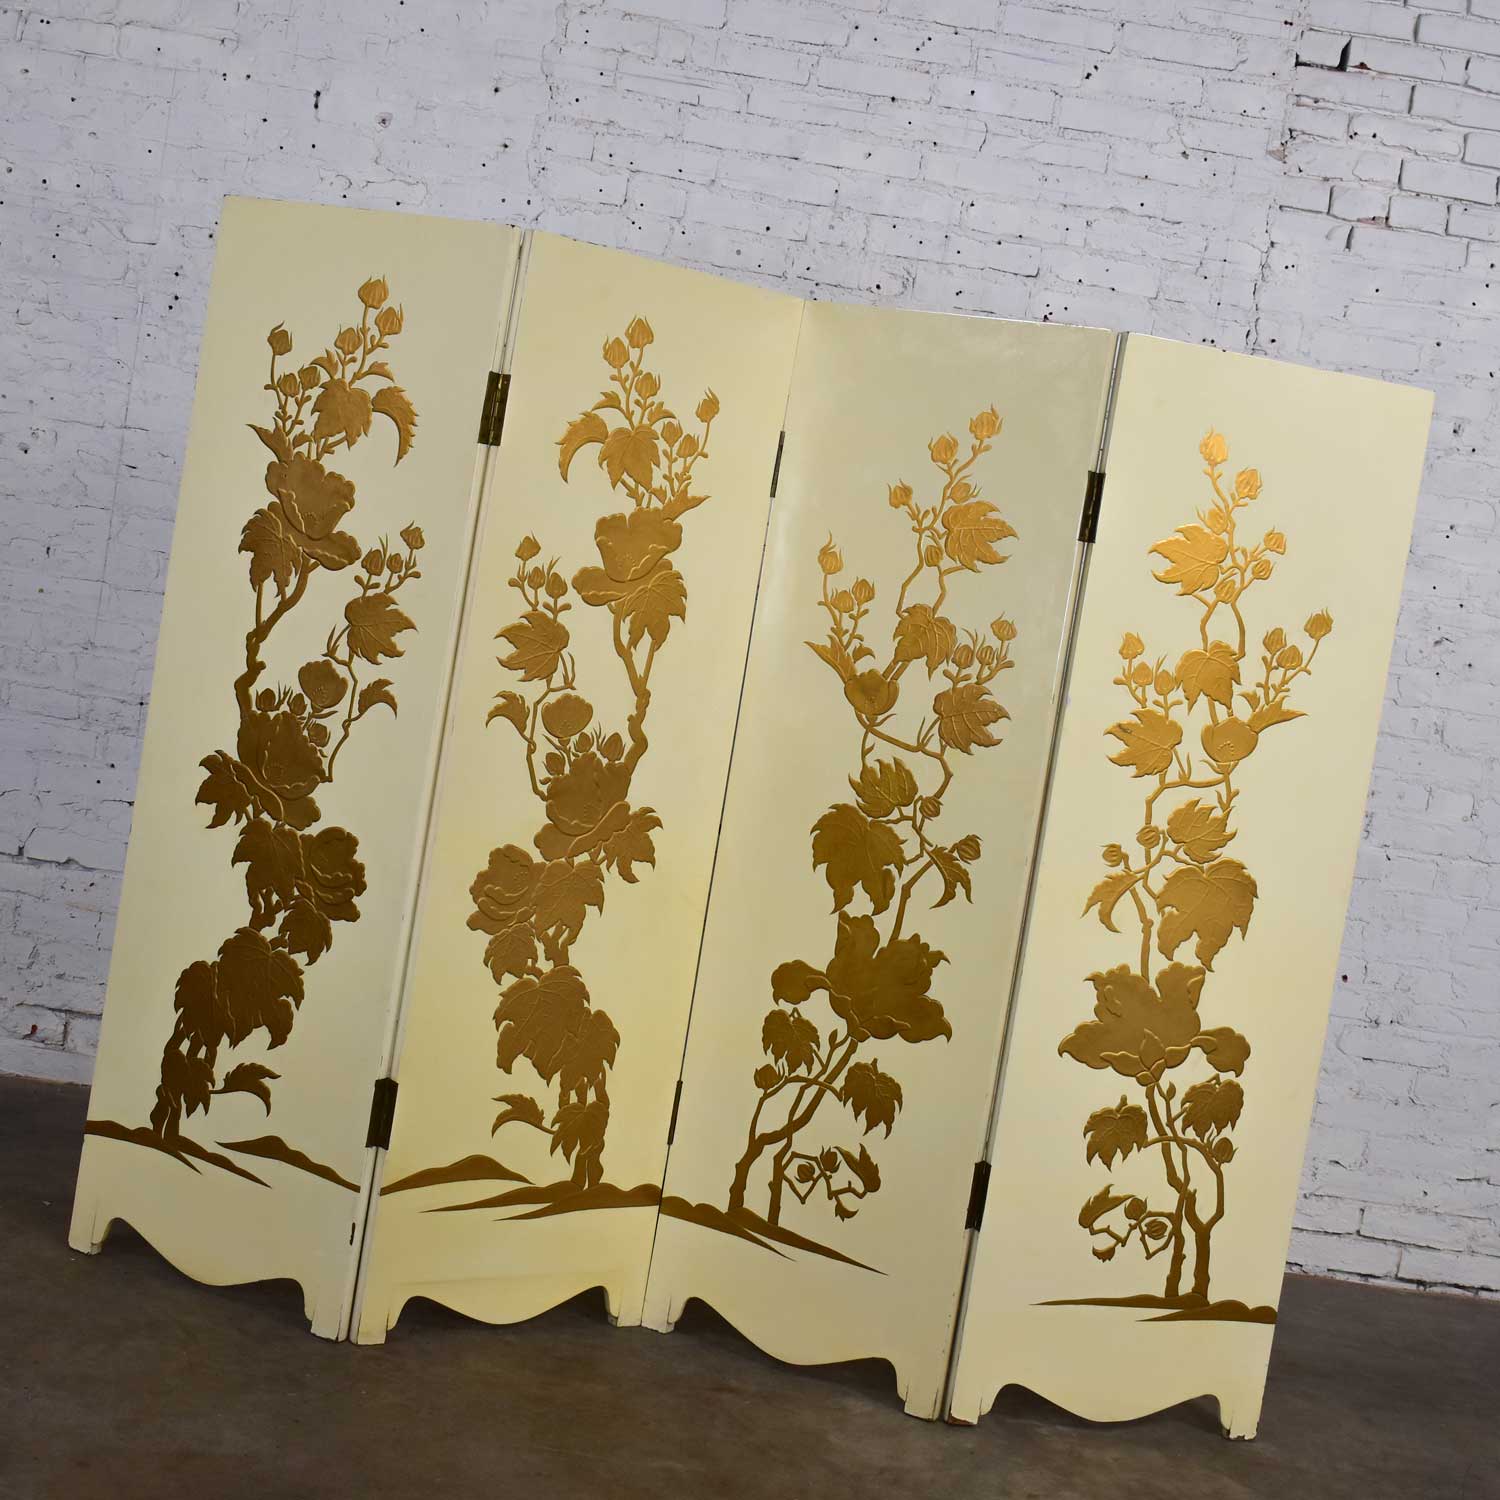 Painted Off White Hollywood Regency BoHo Chic Four Panel Folding Screen with Floral Embossed Design